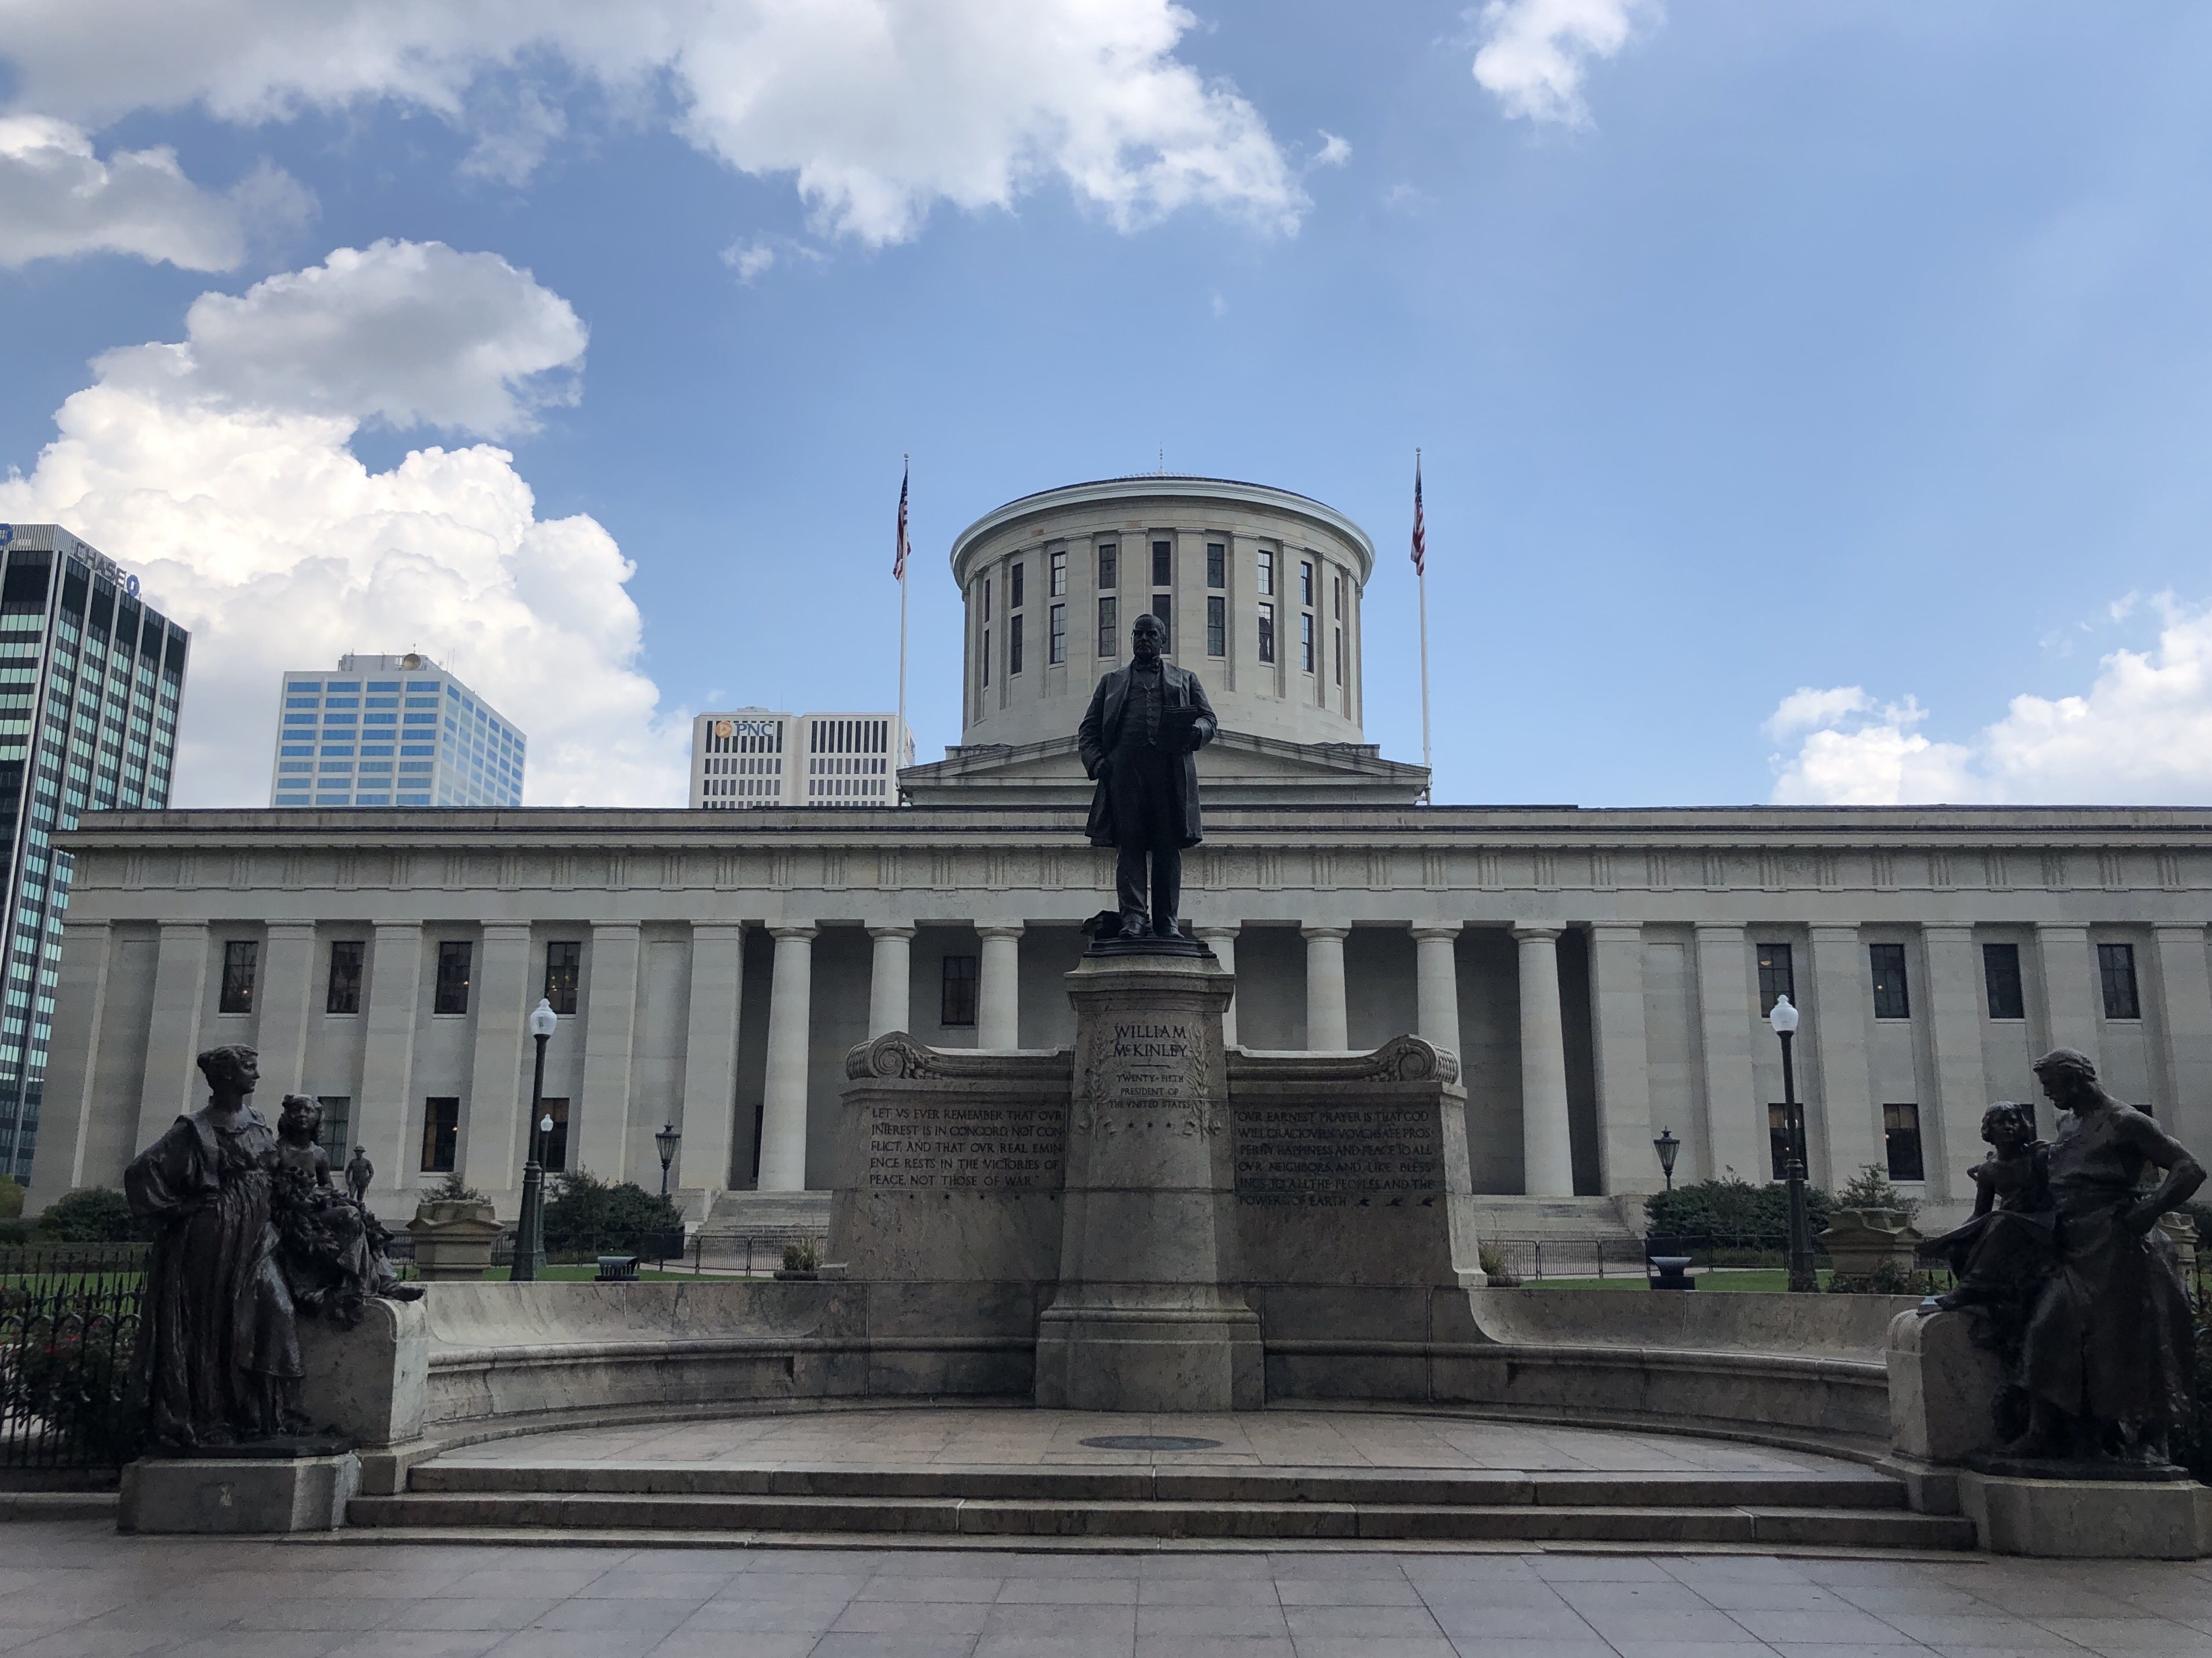 Completed in 1861 the Ohio Statehouse is one of the few that does not have a dome. The statue was placed in 1906 to honor William McKinley, former Ohio Governor and US President.